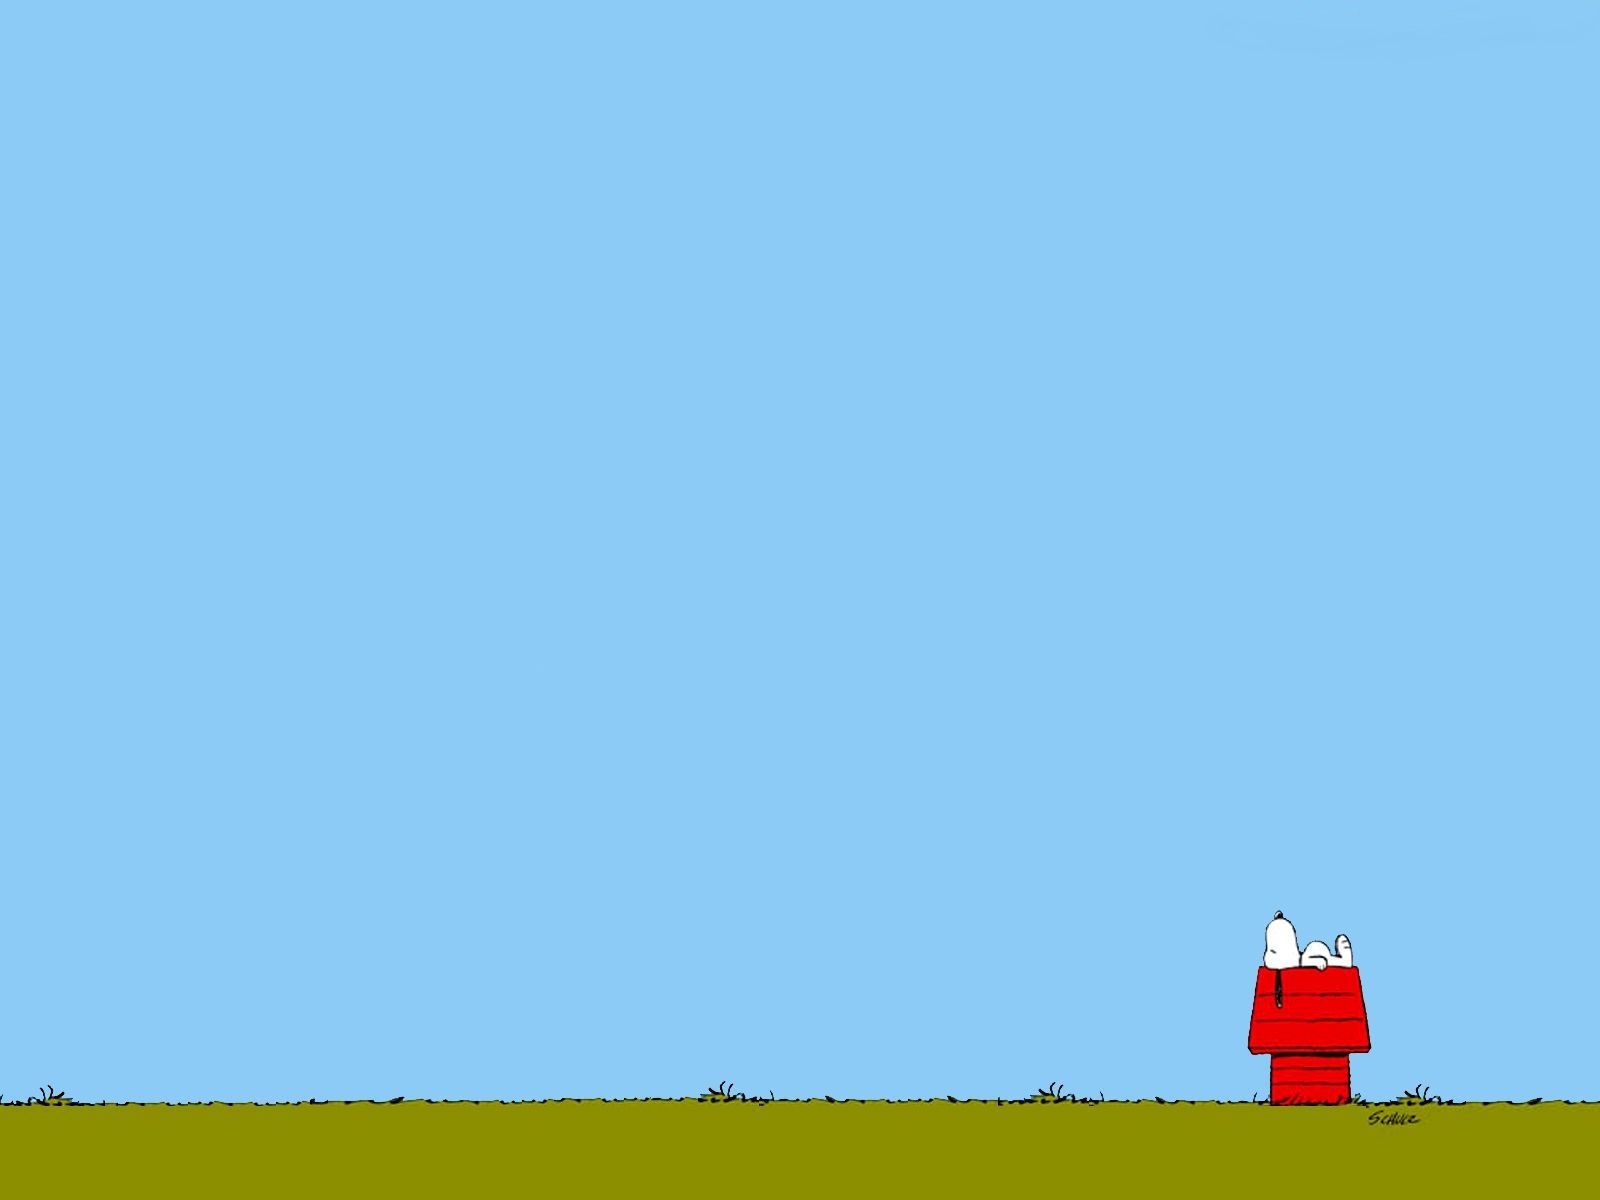 Snoopy Wallpapers Hd Group 74